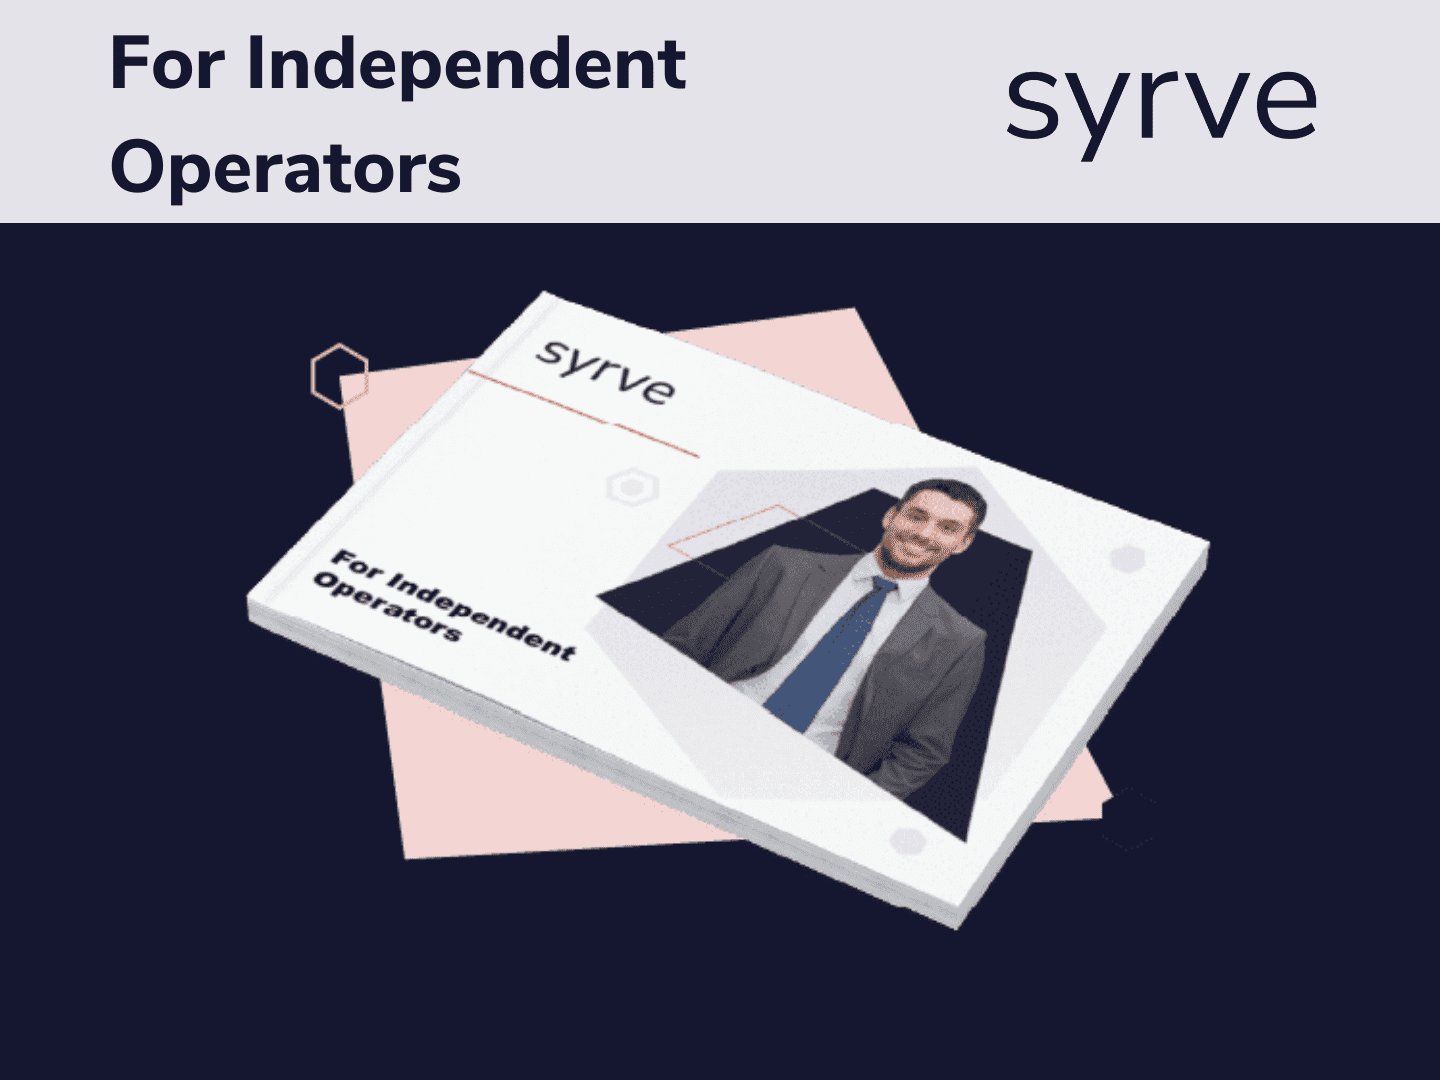 For Independent Operators